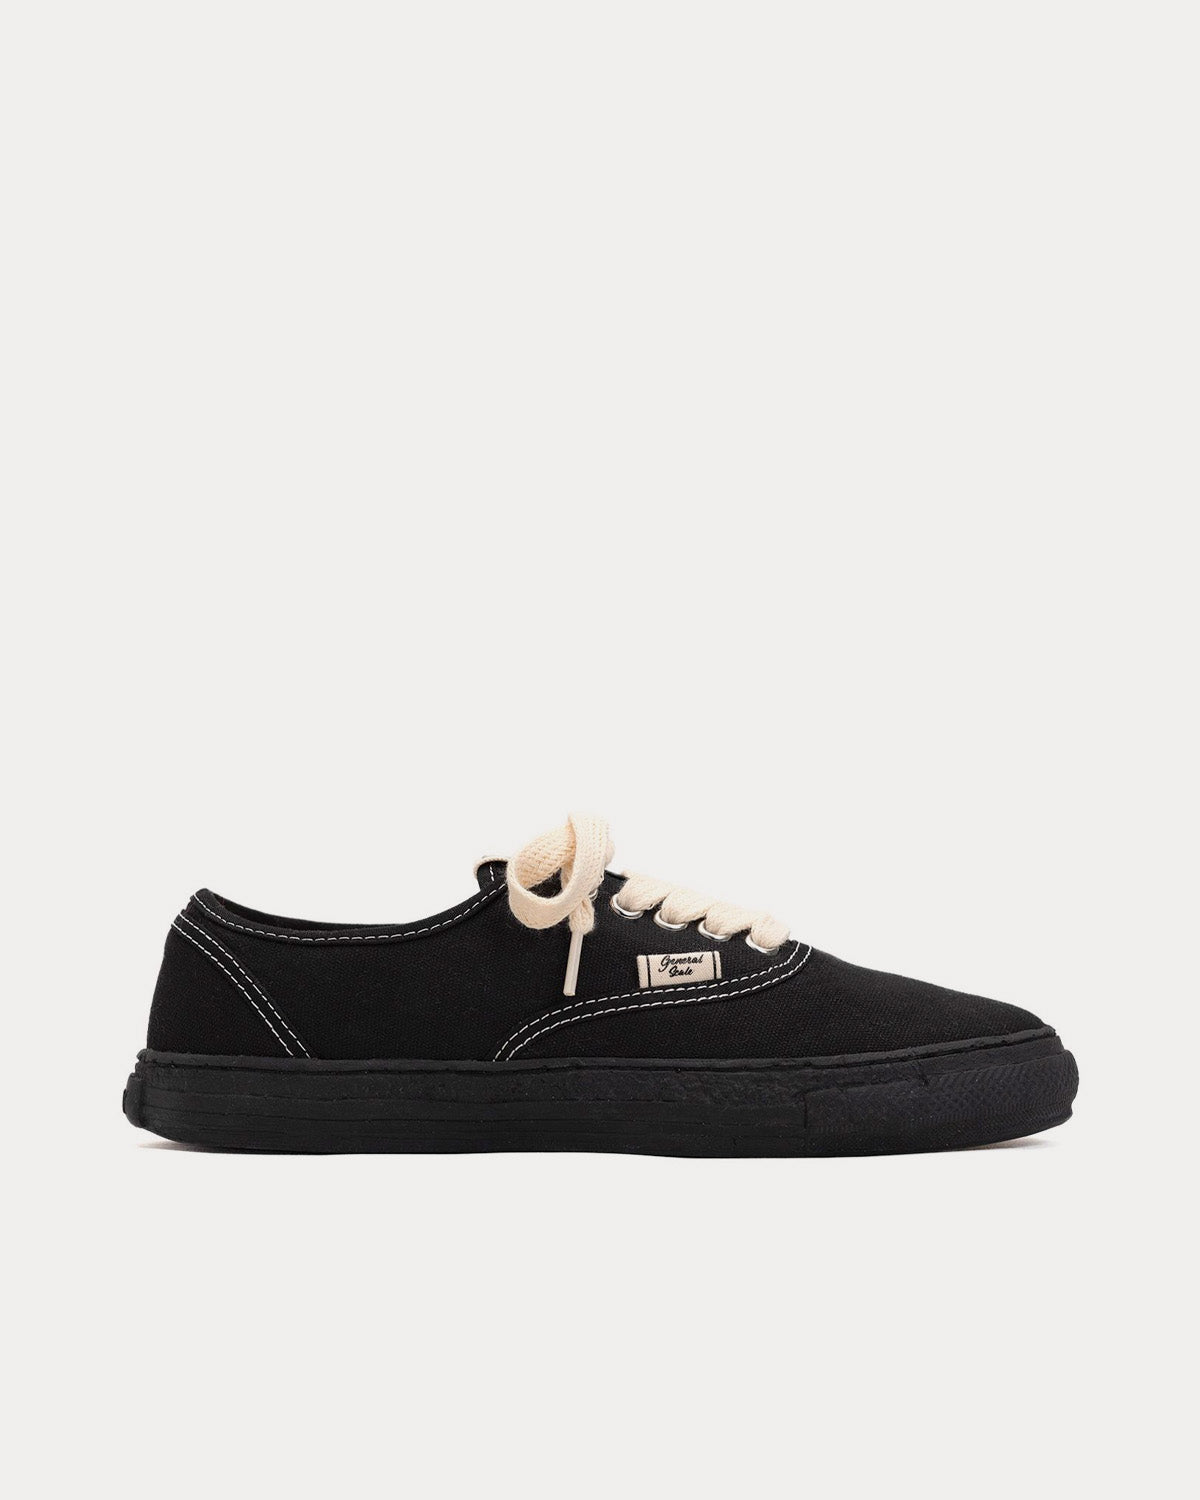 General Scale By Maison Mihara Yasuhiro - Past Sole 5 Canvas Black / Black Low Top Sneakers